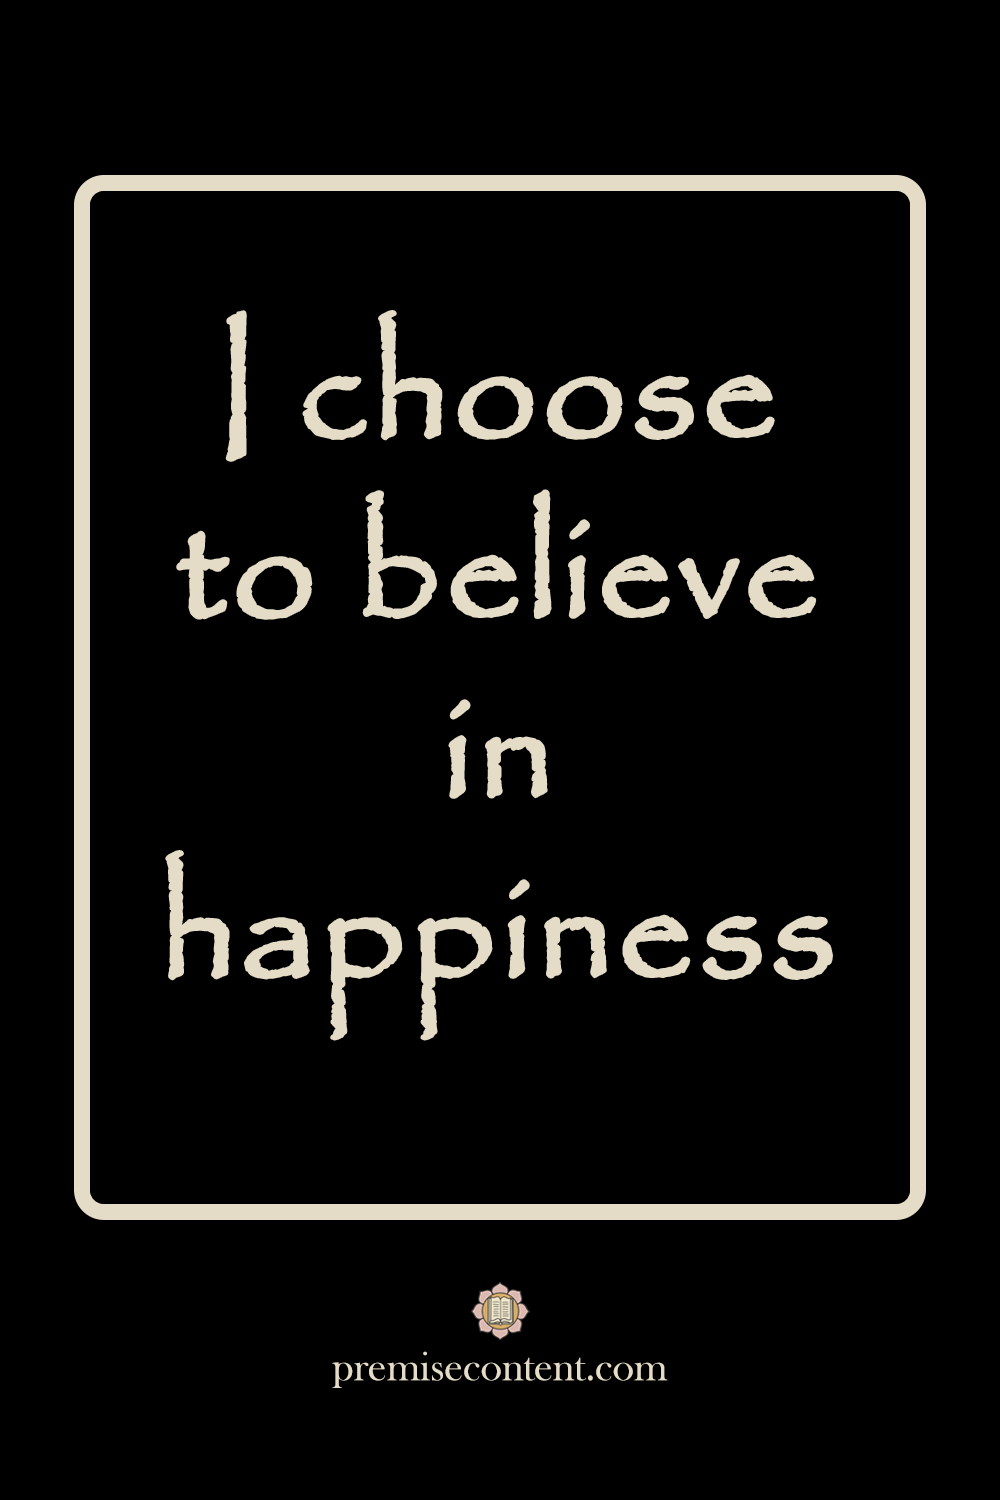 I choose to believe in happiness - Positive Affirmation